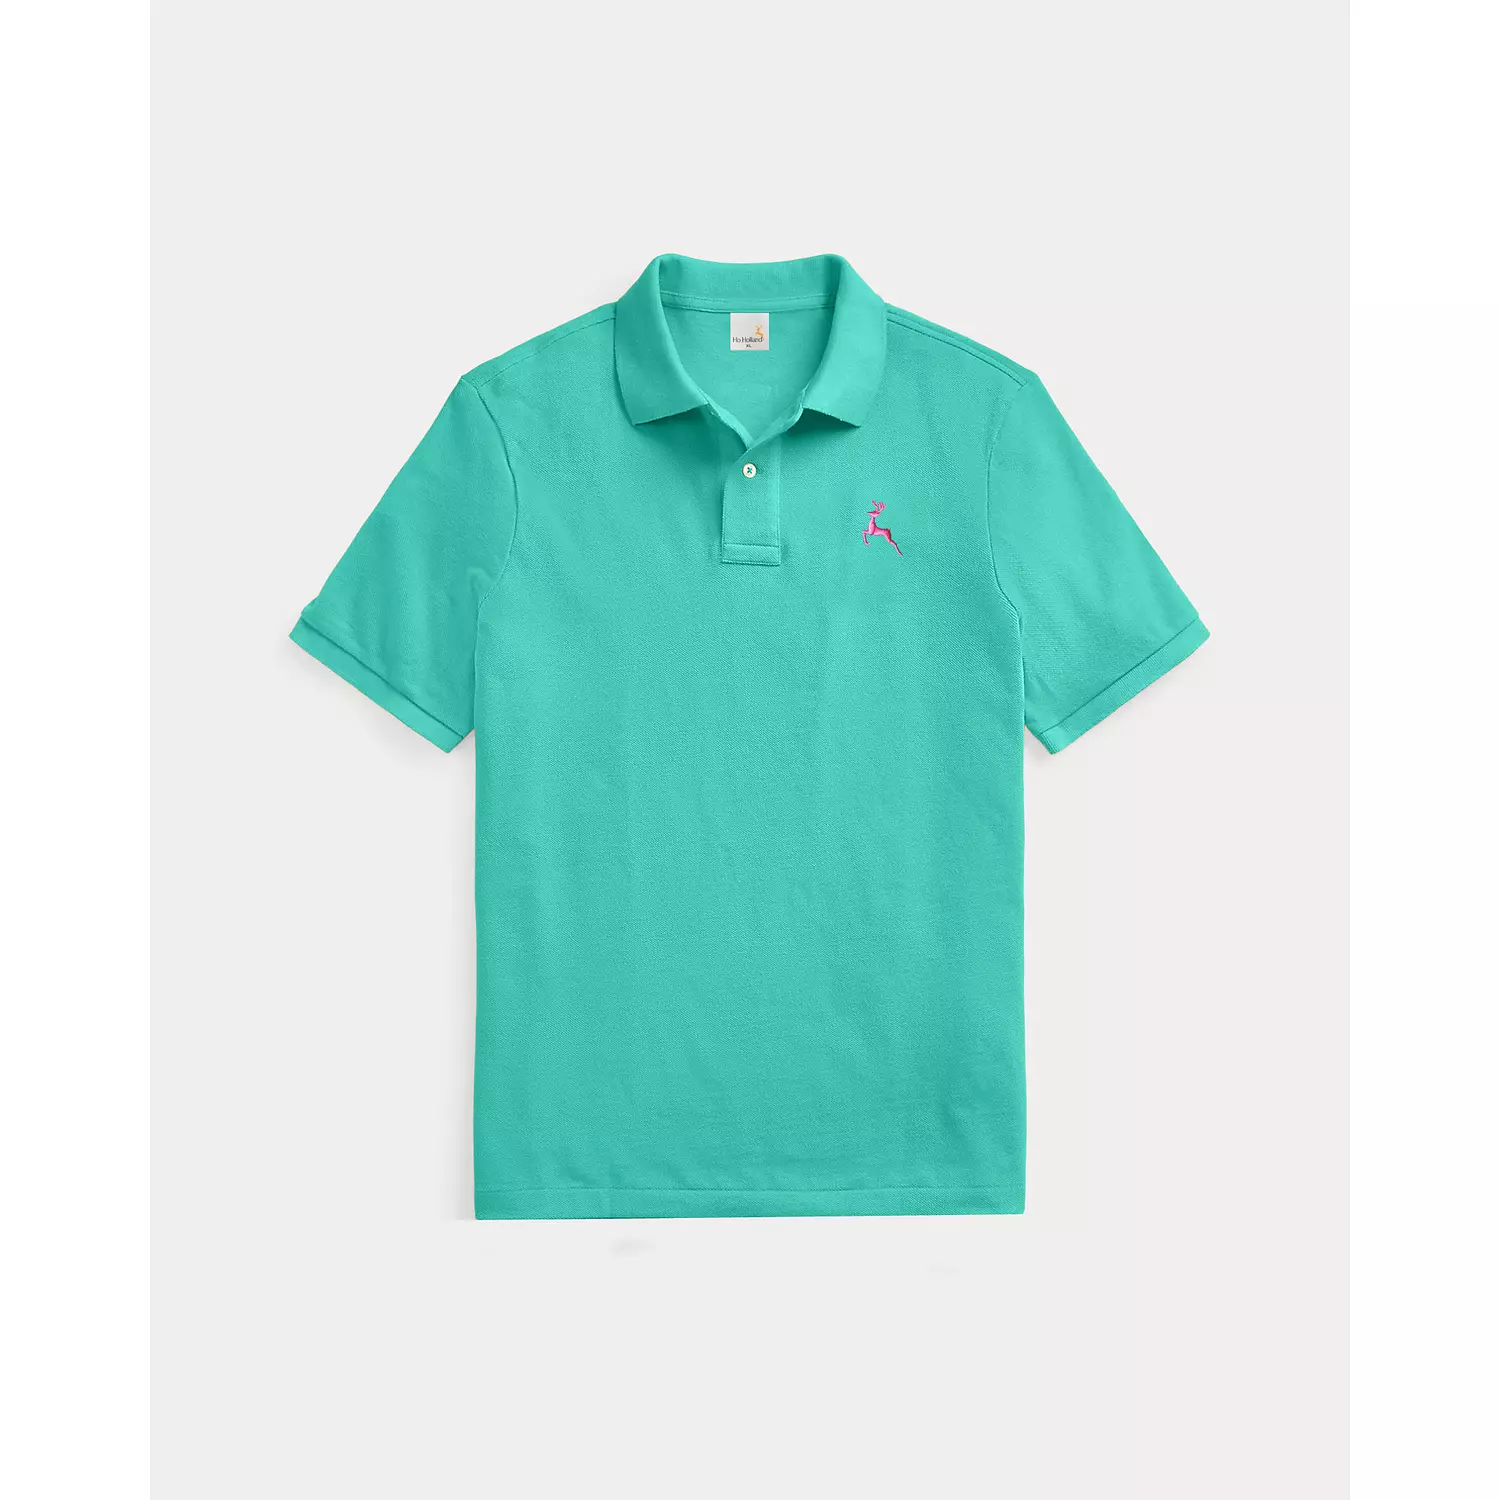 Polo T shirt - Turquoise 0